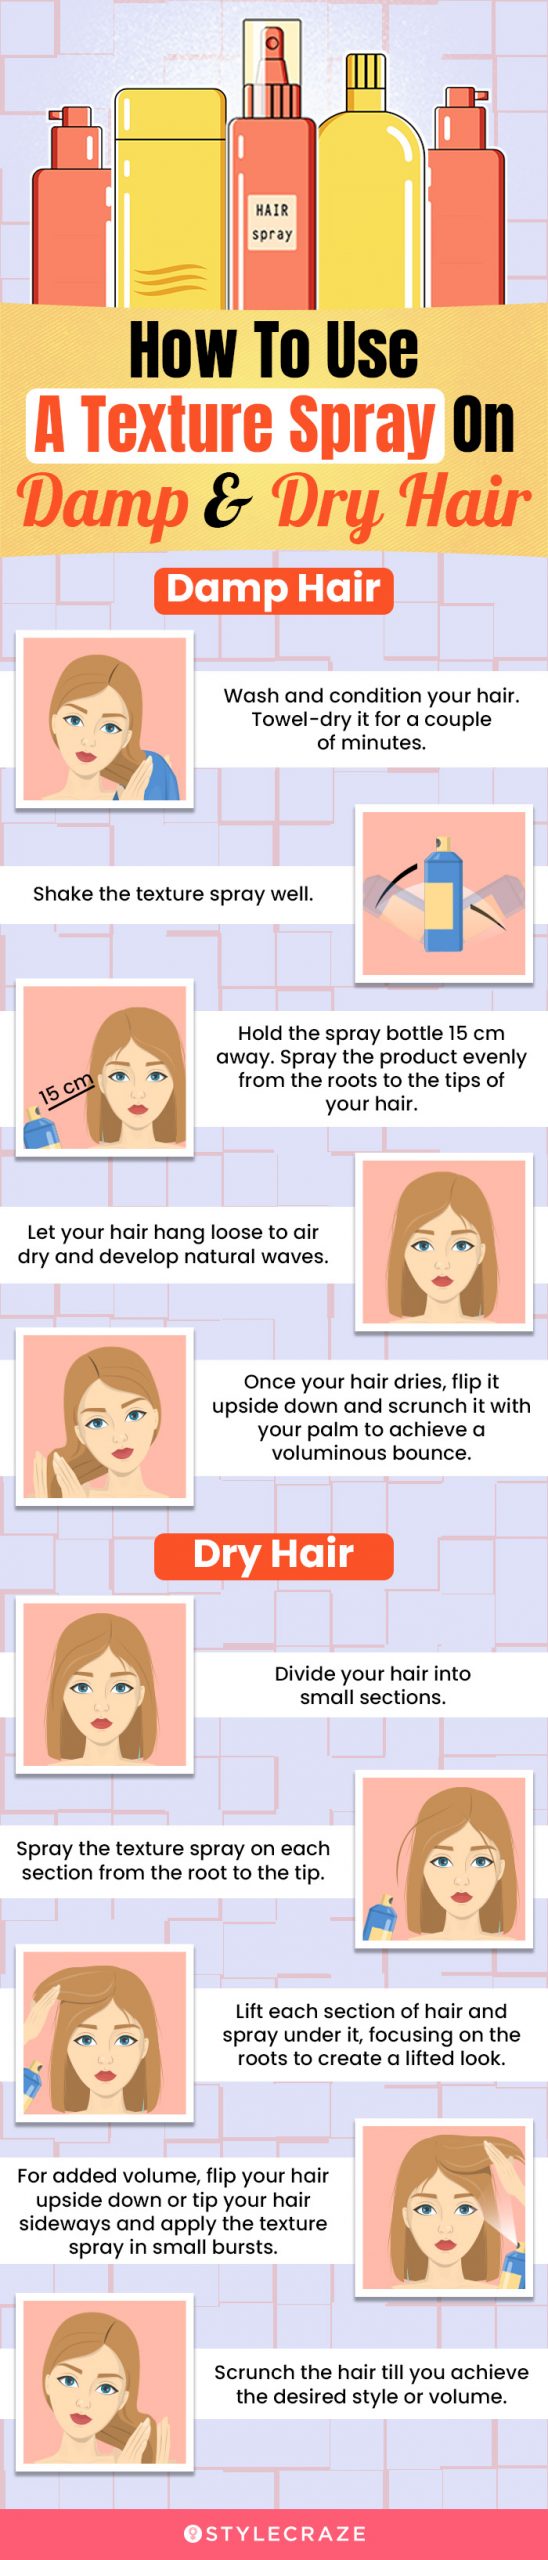 How To Use A Texture Spray On Damp & Dry Hair (infographic)